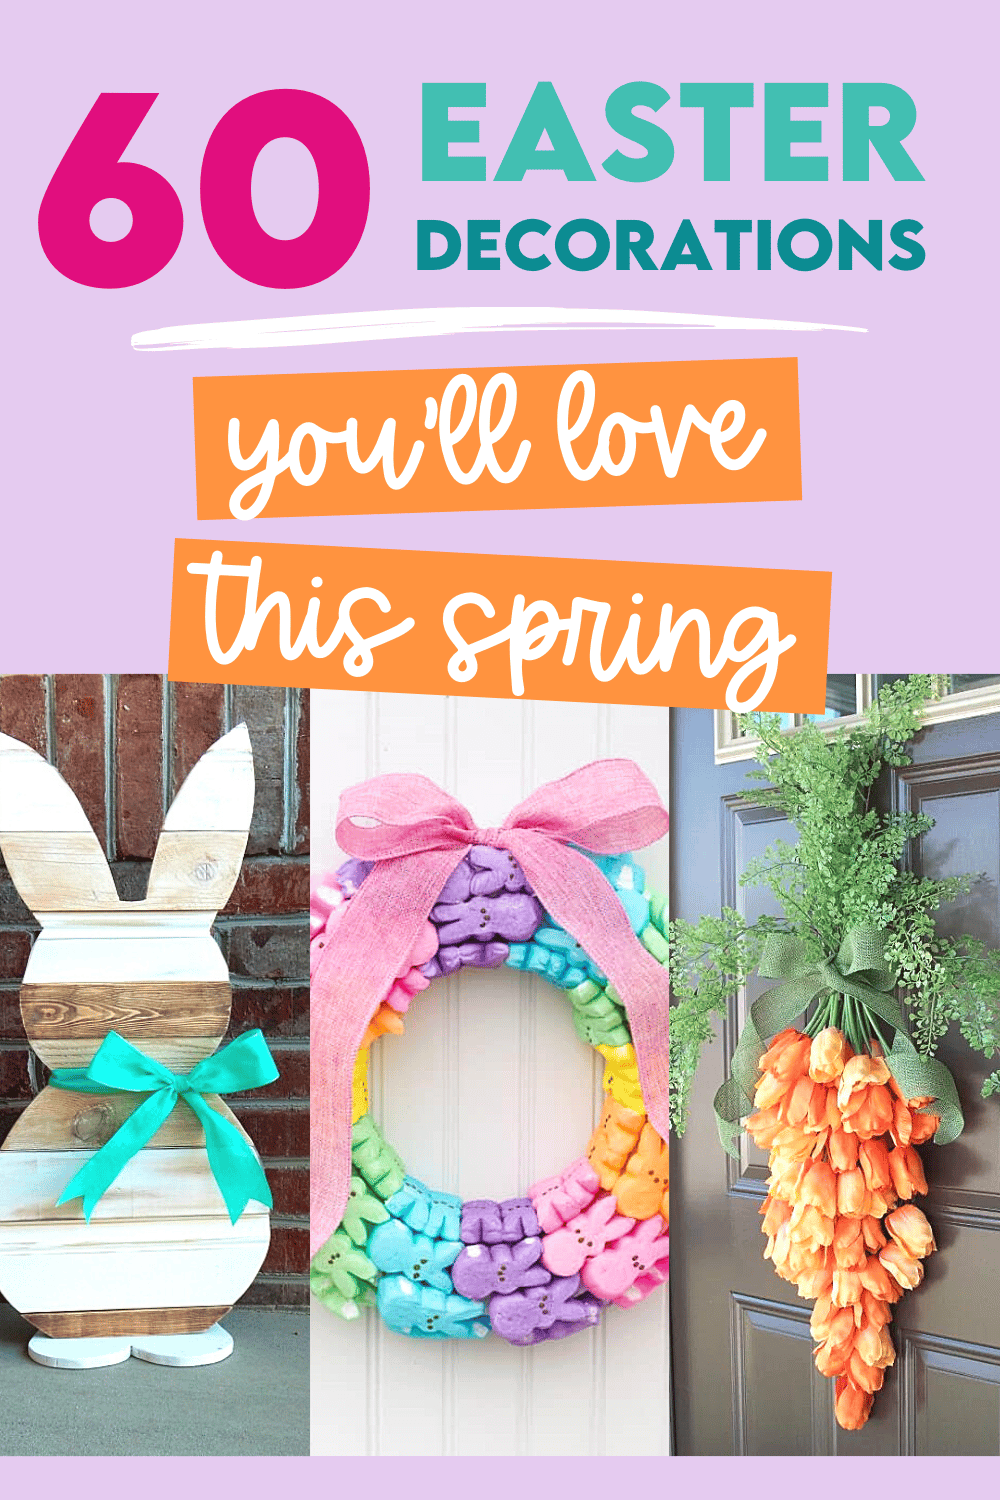 Check out this huge list of 60 Easter decorations! | The Dating Divas